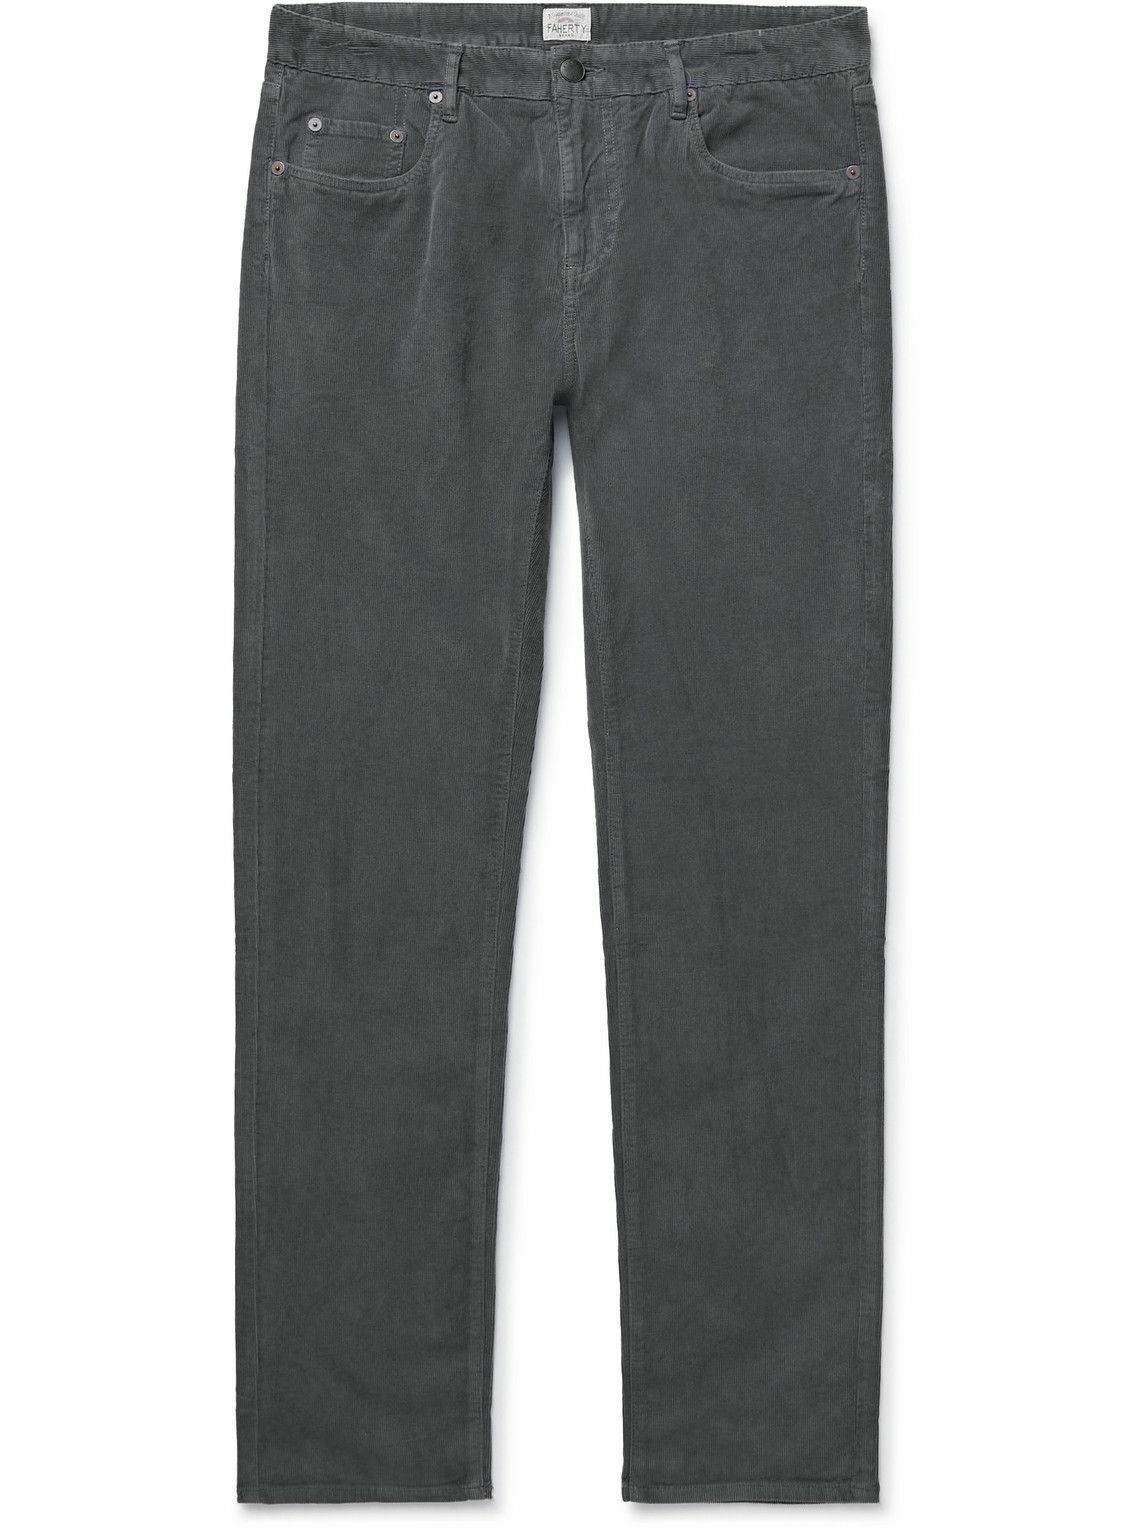 Faherty - Slim-Fit Cotton-Blend Corduroy Trousers - Gray Faherty